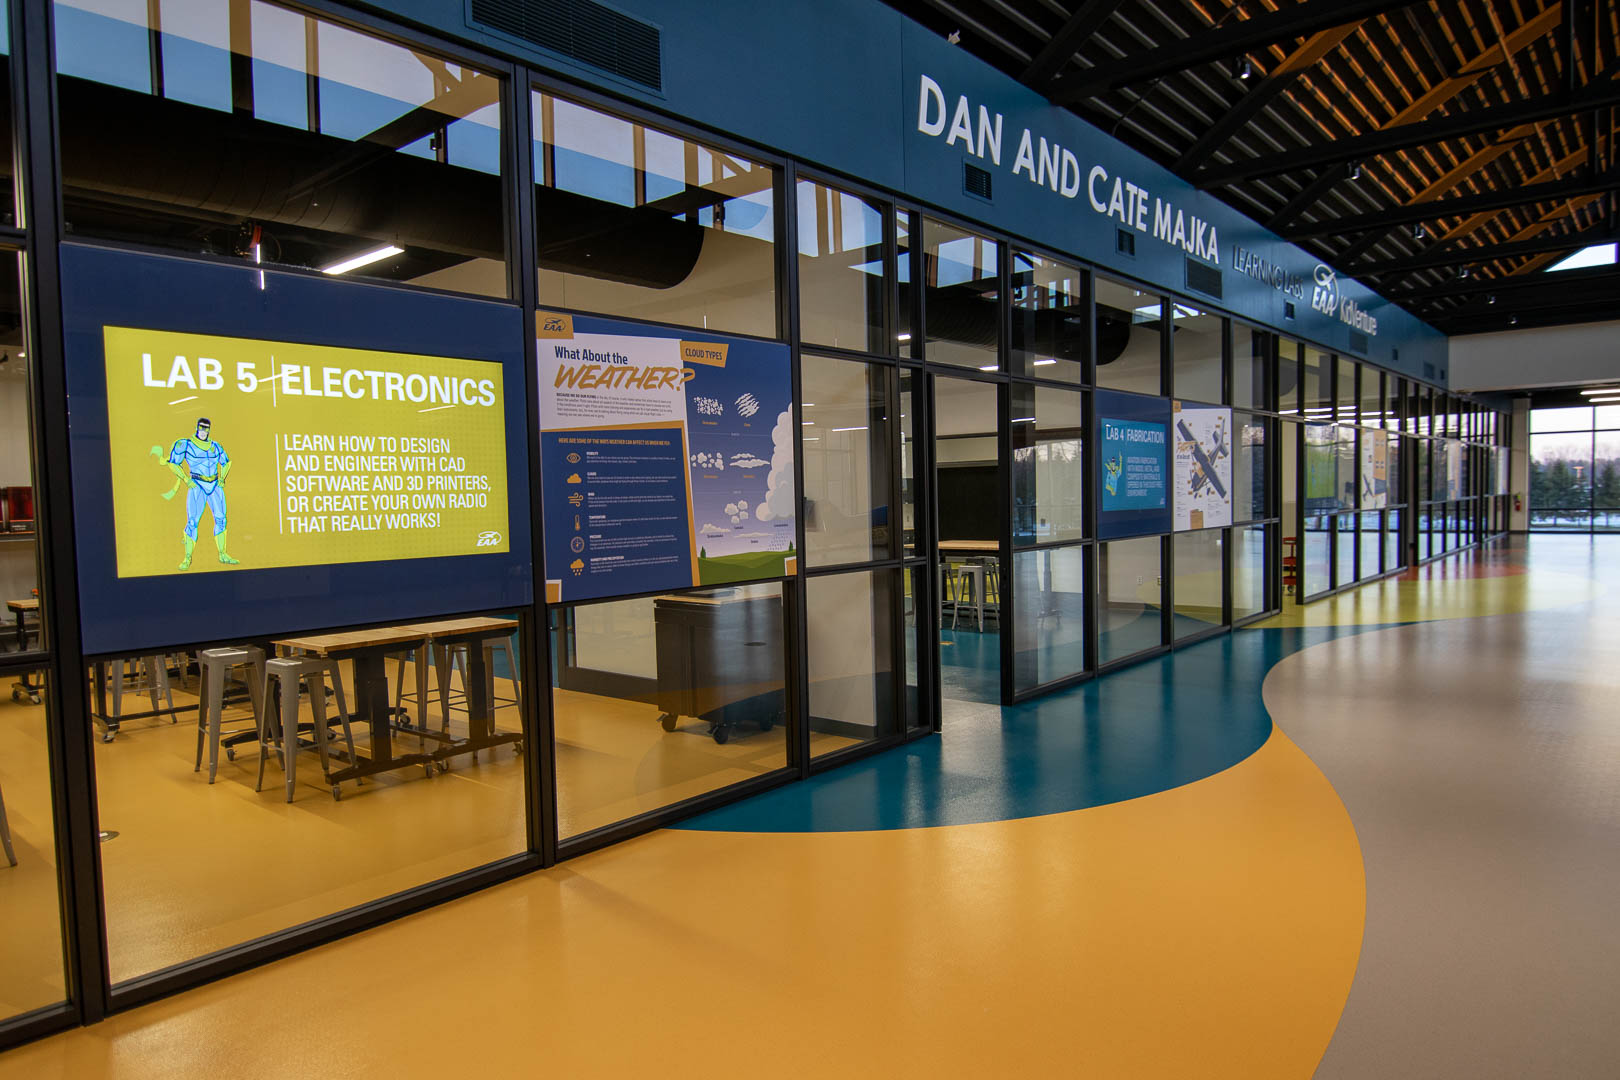 A few down the hallway of the hands on learning classrooms at the EAA education center. Digital signage displays the name of each room.